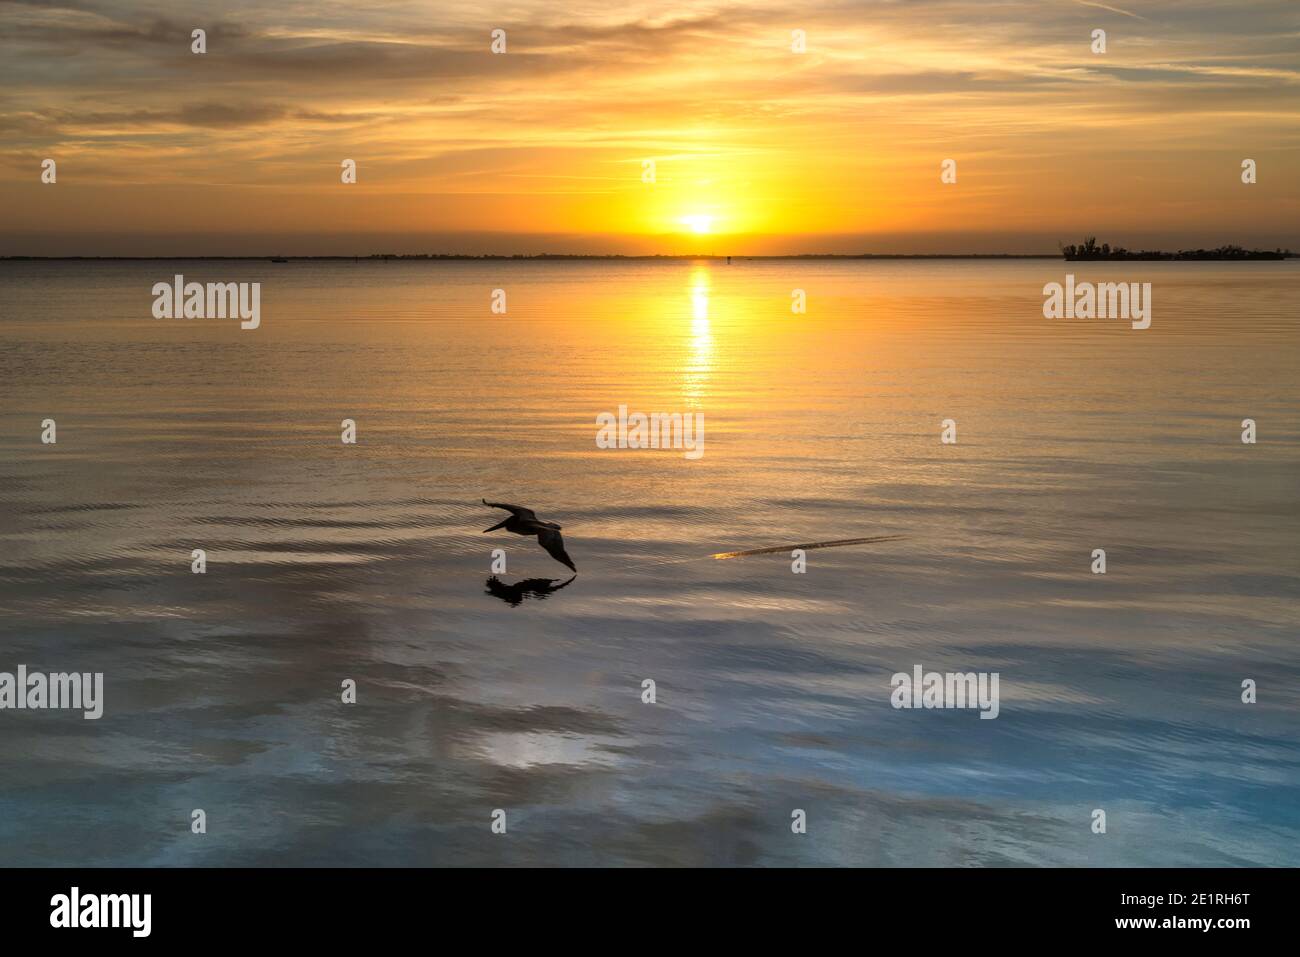 Scenic view of a pelican flying across the Saint Sebastian river with the sunrise in the background in Sebastian, Florida. Stock Photo